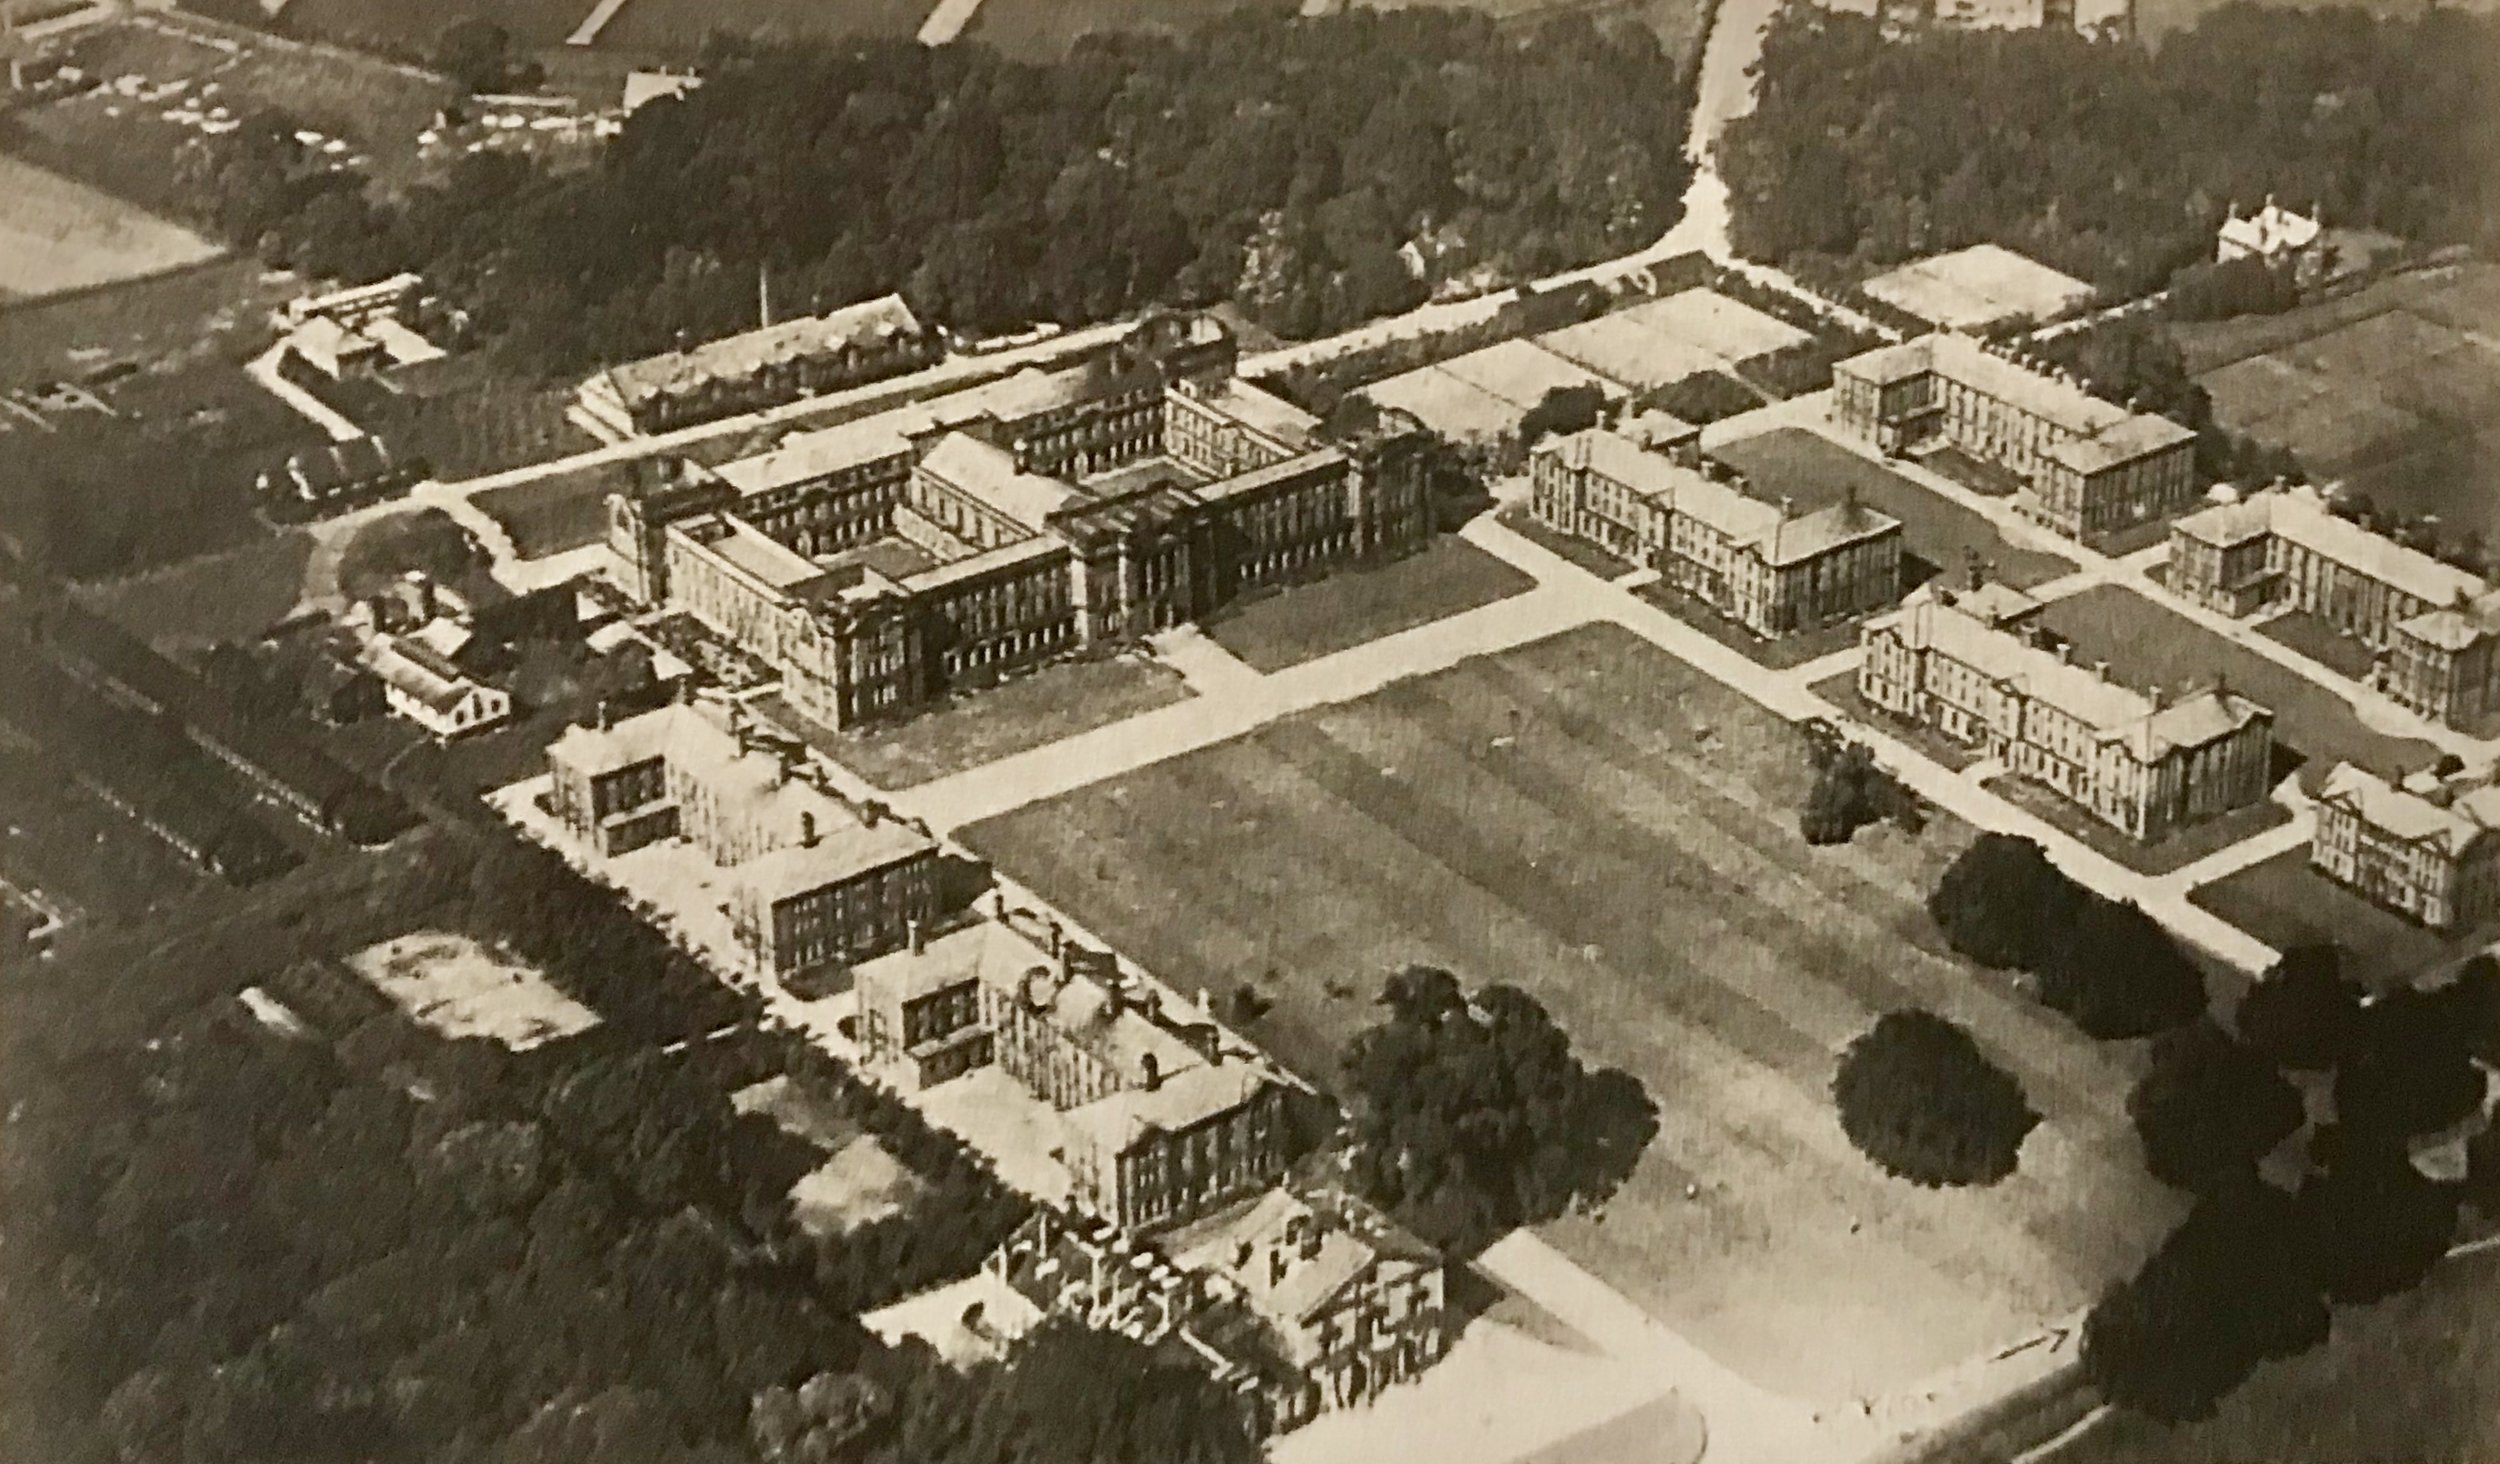 College from the air